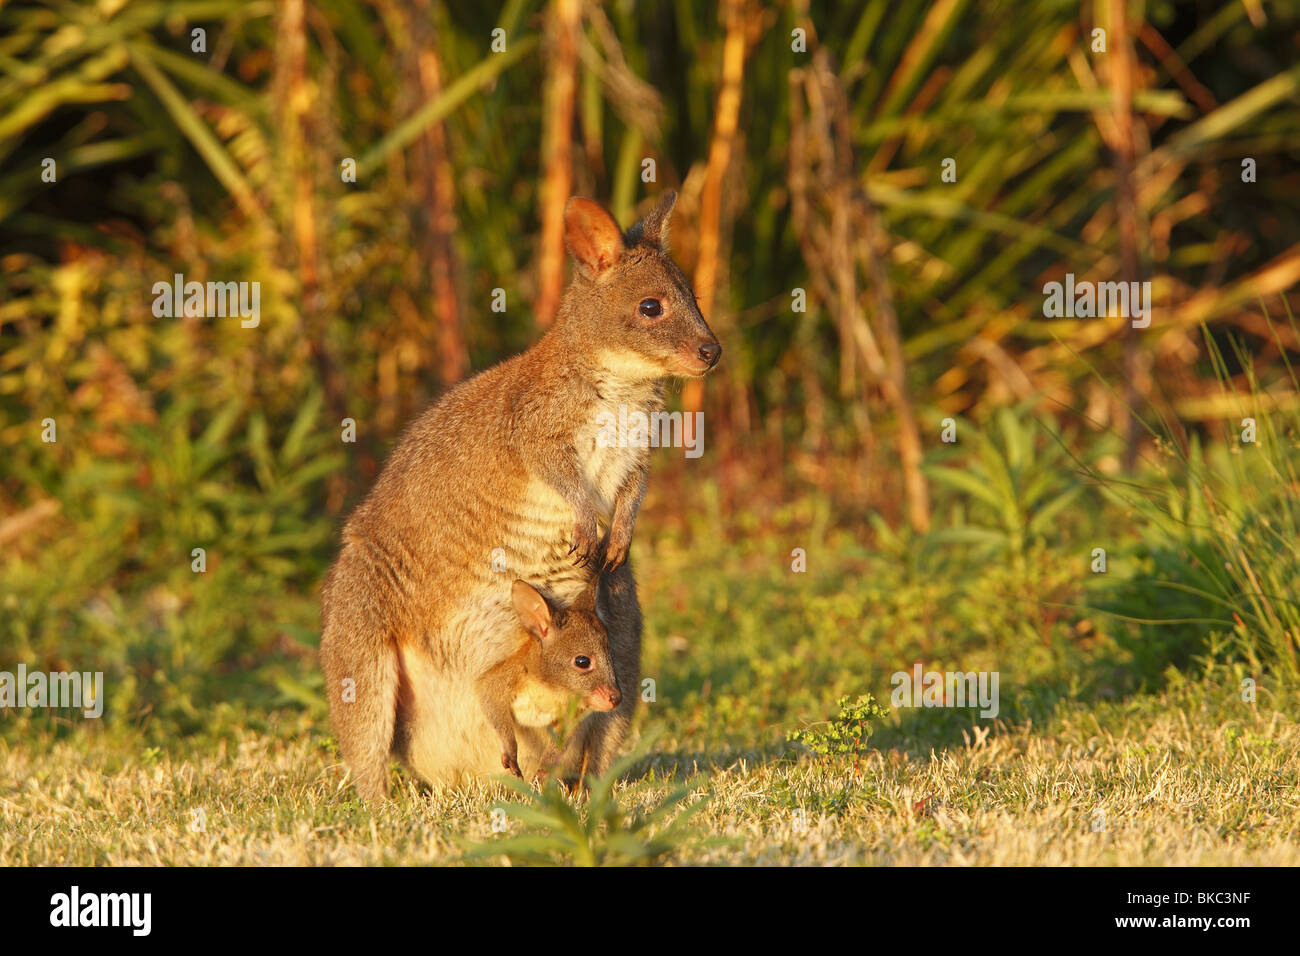 Red-necked Pademelon (Thylogale thetis). Mother with joey in pouch. Stock Photo